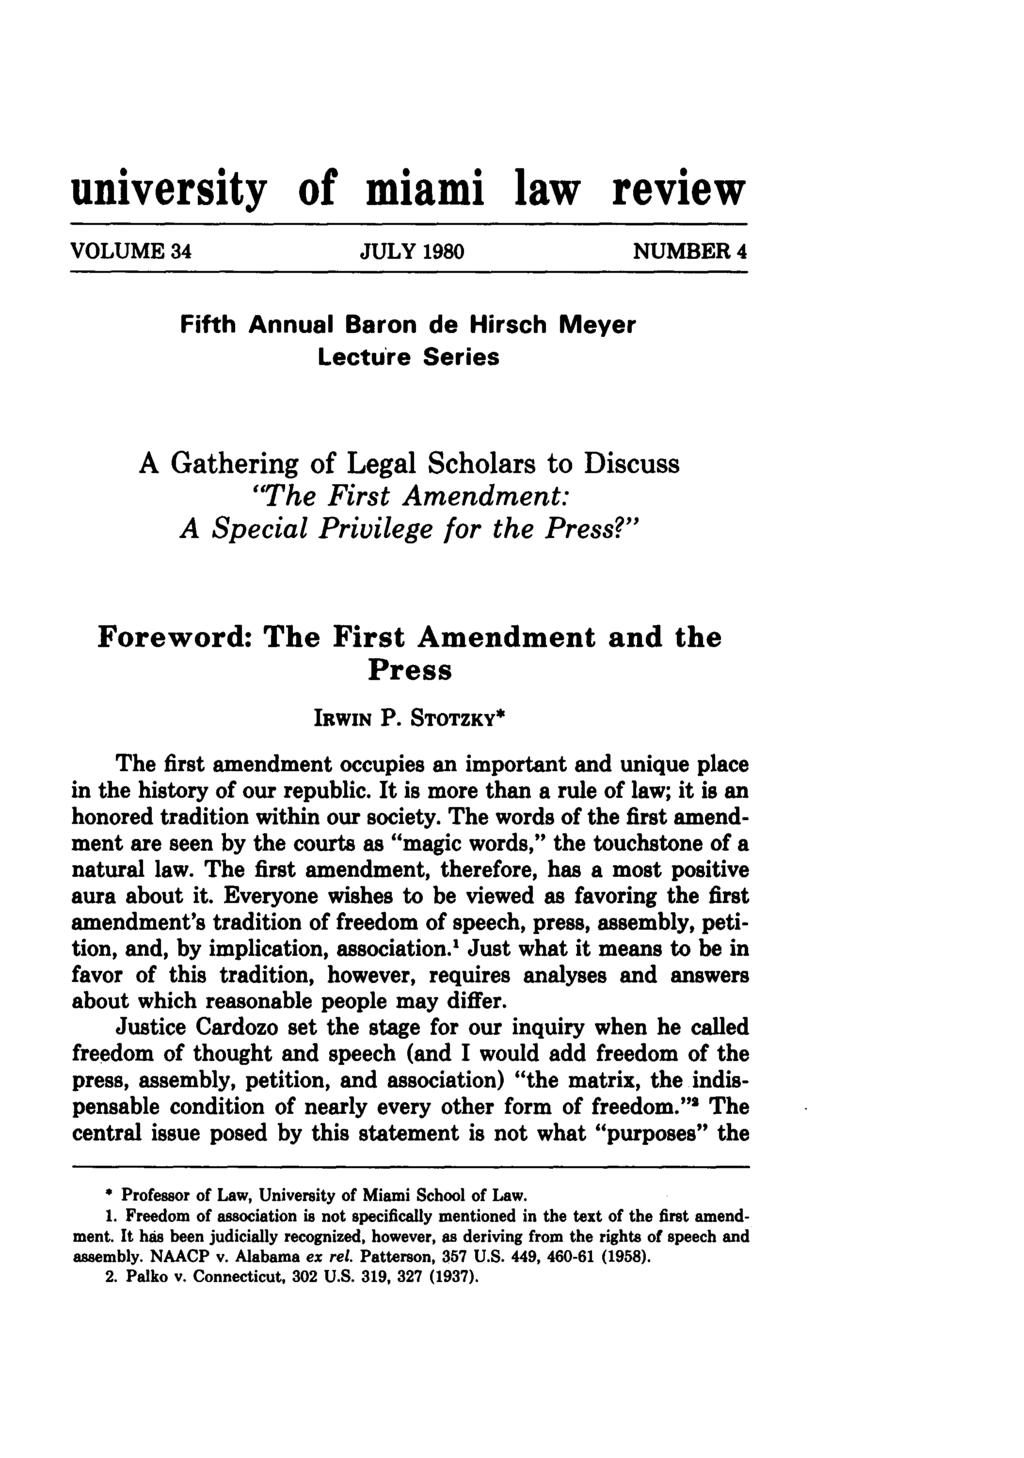 university of miami law review VOLUME 34 JULY 1980 NUMBER 4 Fifth Annual Baron de Hirsch Meyer Lecture Series A Gathering of Legal Scholars to Discuss "The First Amendment: A Special Privilege for